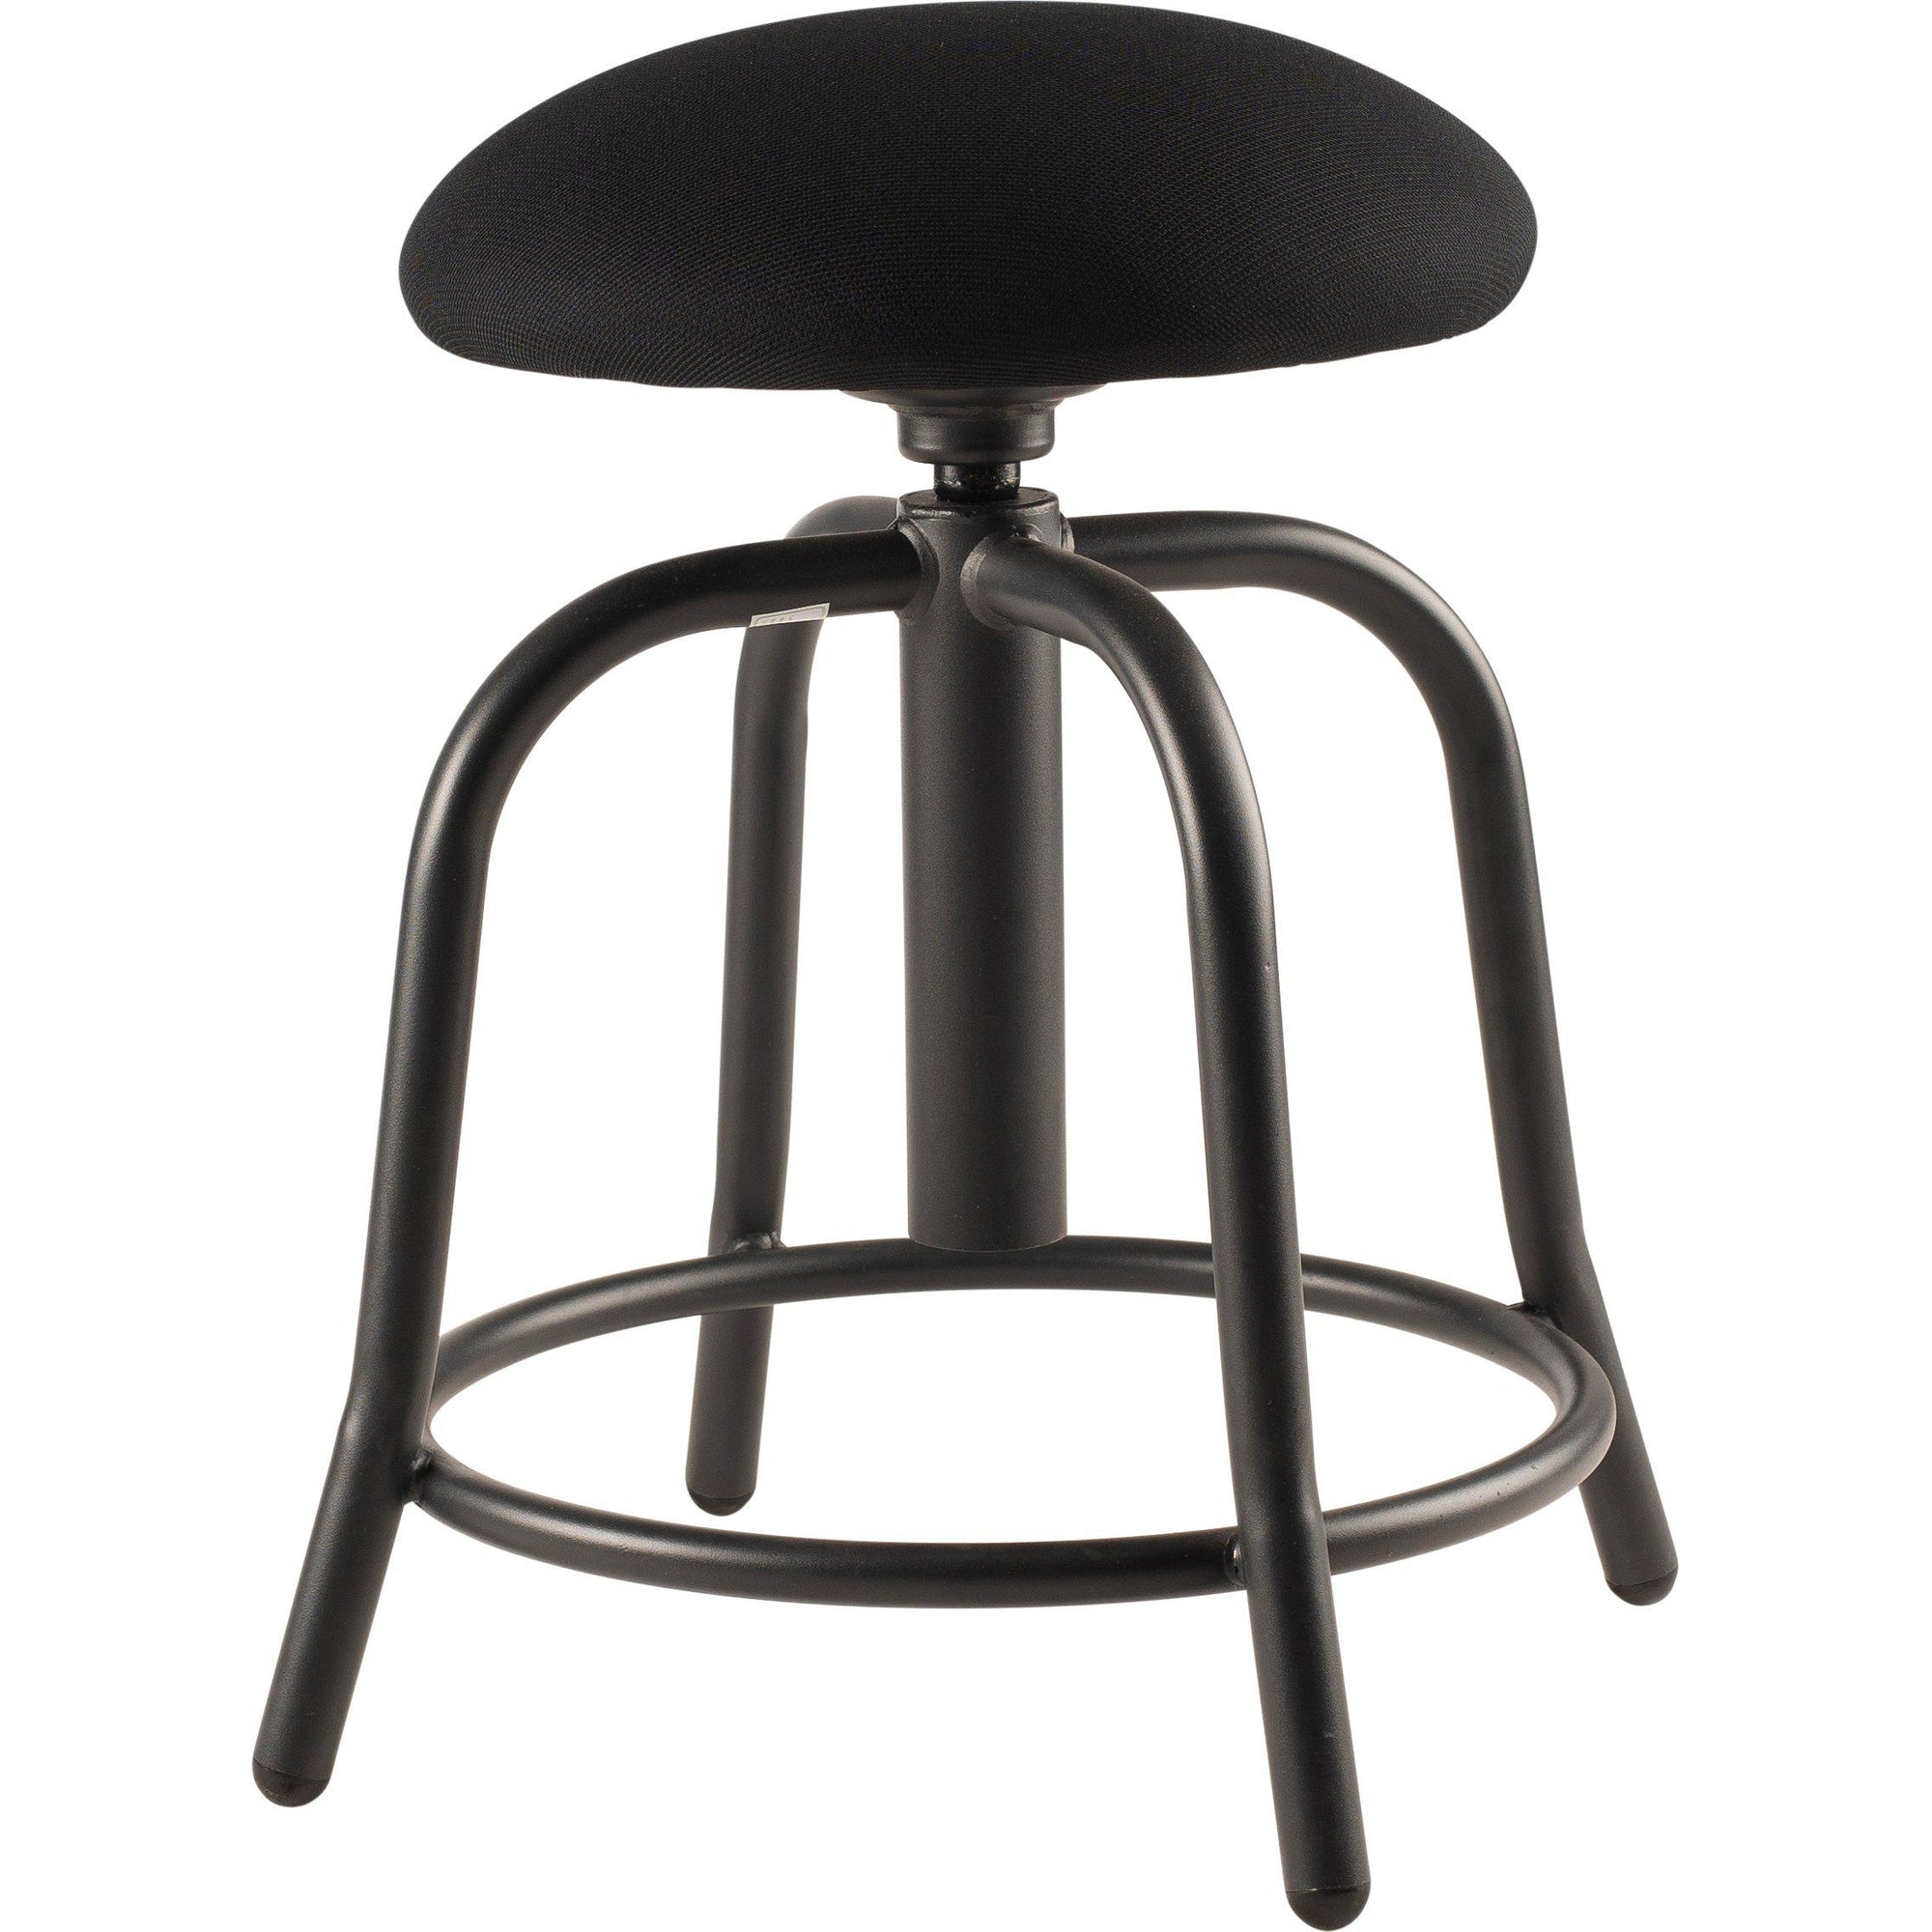 18"-25" Height Adjustable Contemporary Designer Stool with 3" Fabric Padded Black Seat, Black Frame